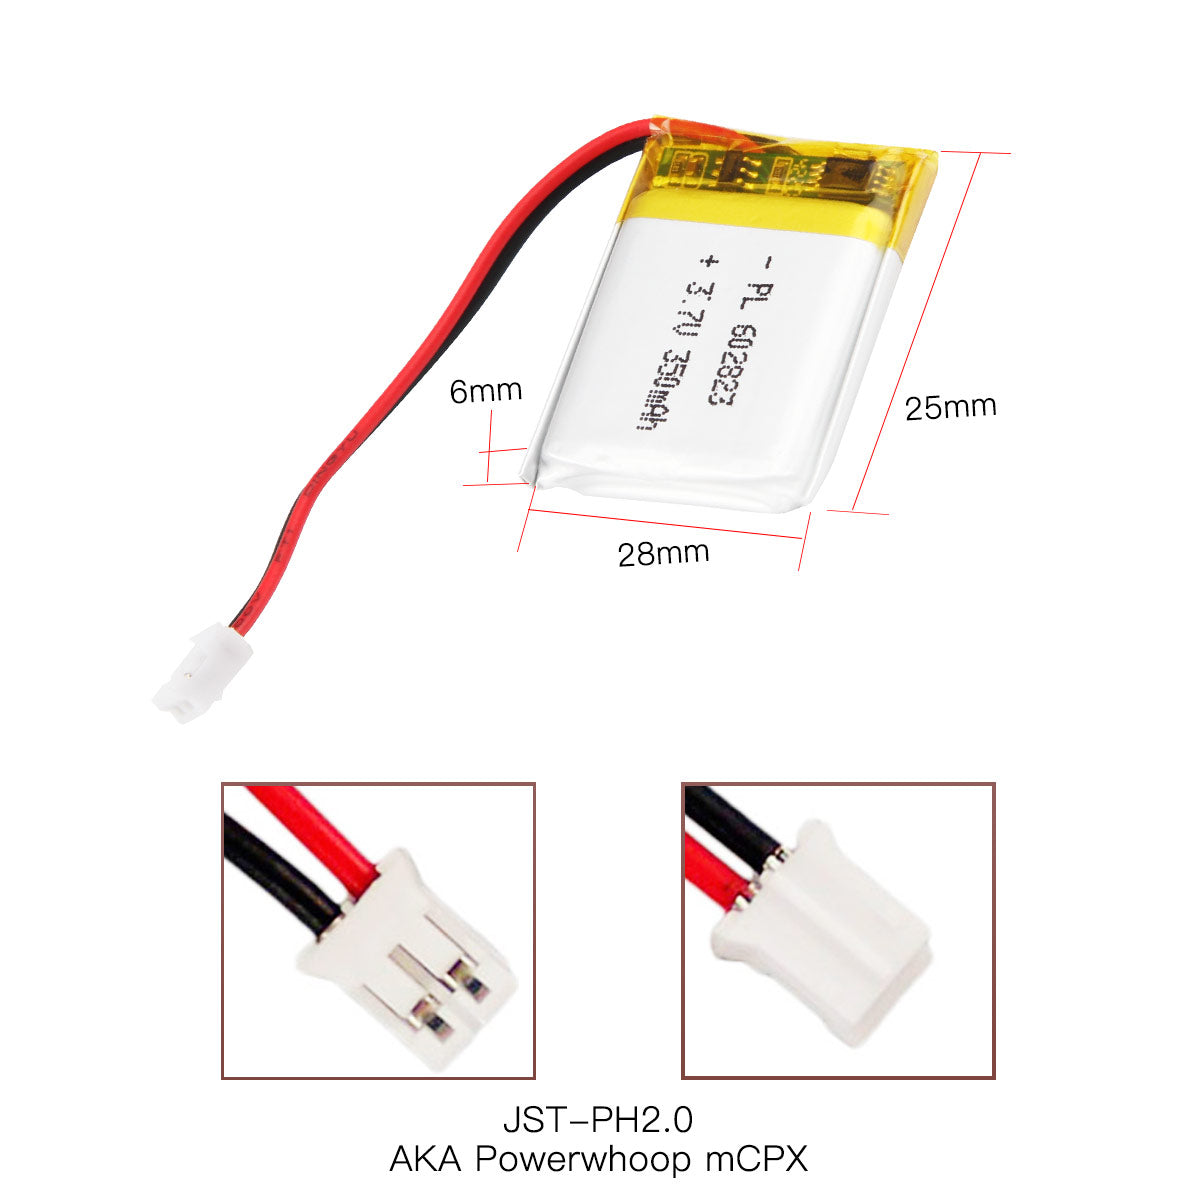 YDL 3.7V 350mAh 602823 Rechargeable Lithium Polymer Battery Length 25mm